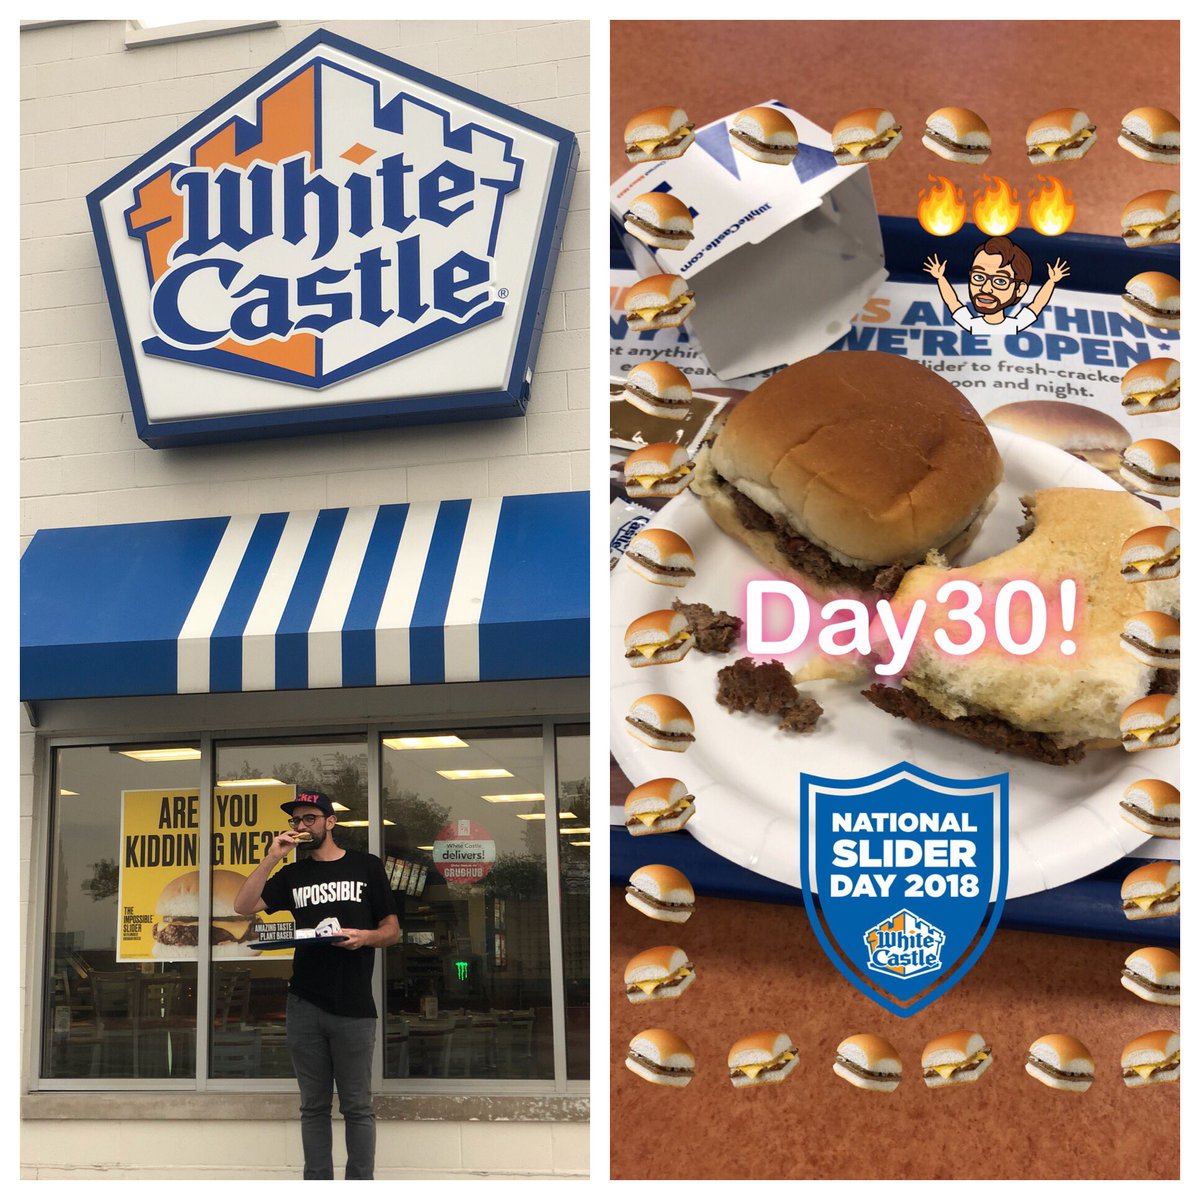 🚾🍔30 day challenge complete!✅ Ate an impossible slider for dinner everyday for 30 days 😍🔥🙏🏻! @ImpossibleFoods @WhiteCastle #mrimpossible